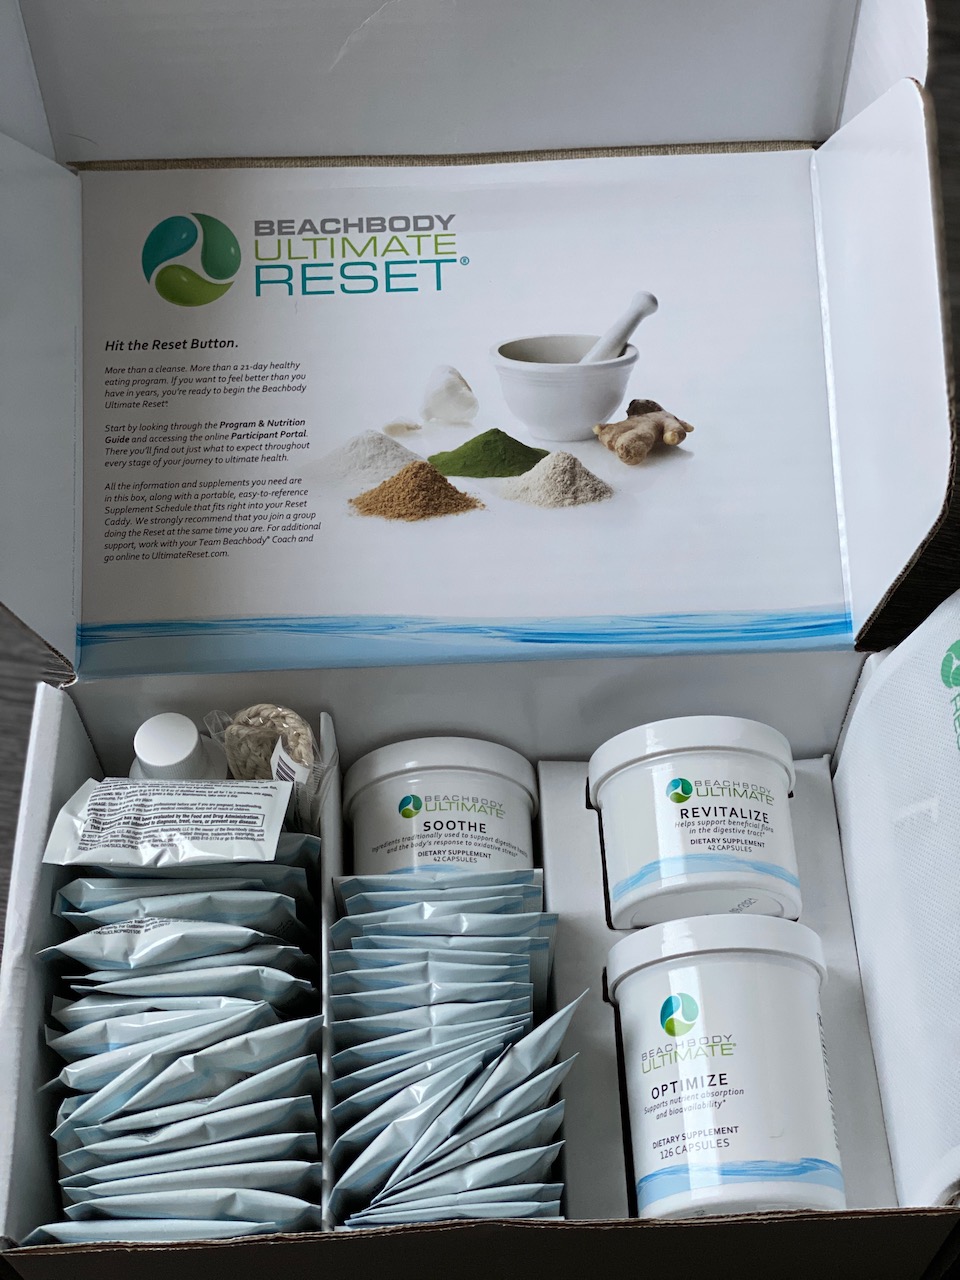 Trying the Beachbody Ultimate Reset 21 Day Cleanse For The First Time